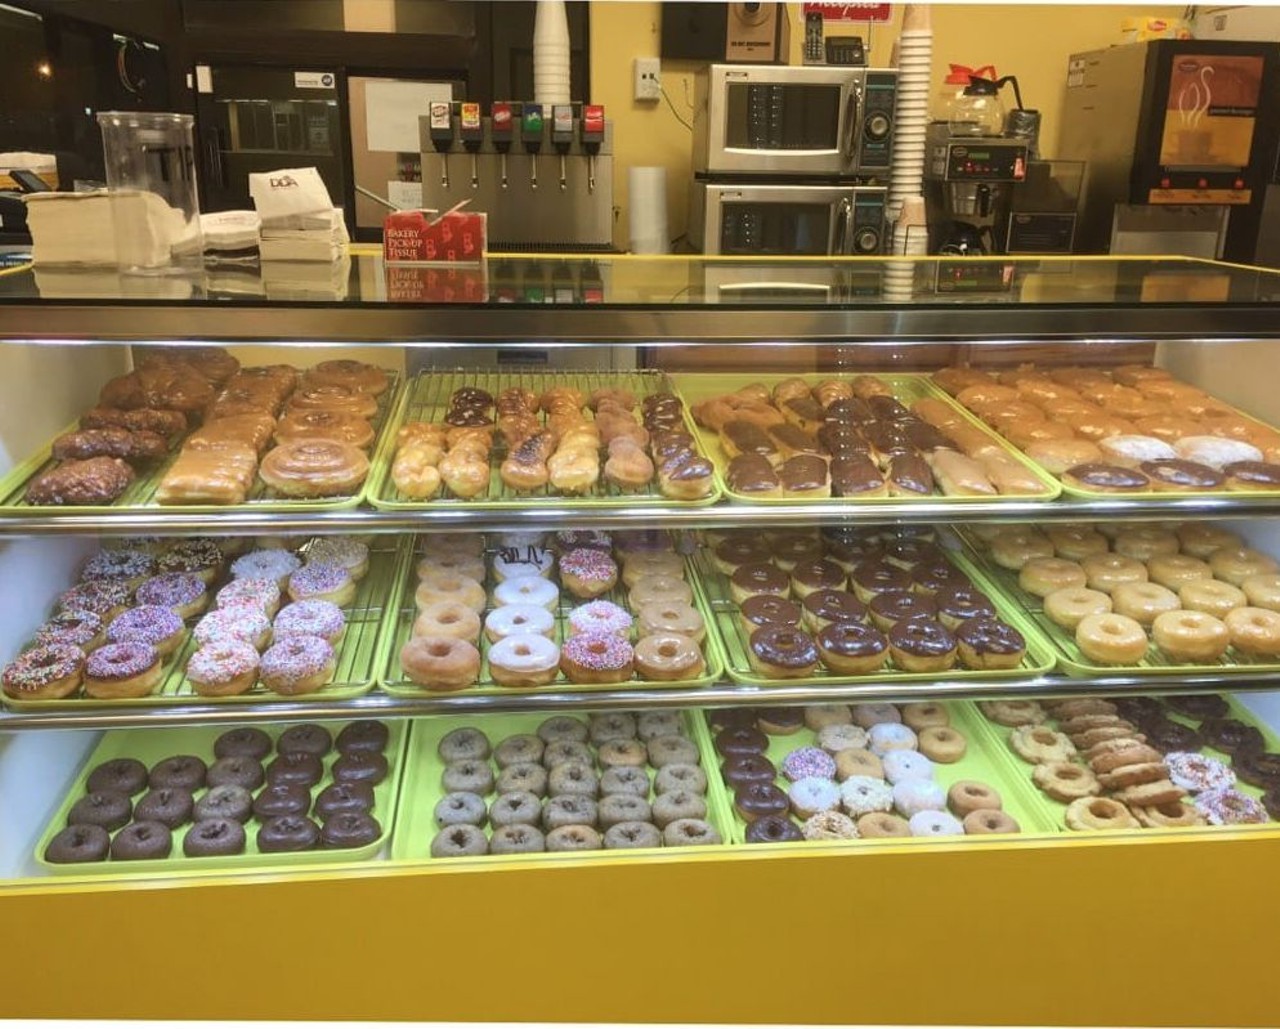 Fresh Donuts
1302 Austin Hwy.
Like the name suggests, expect fresh doughnuts from 5 a.m. to 2 p.m. daily that are both delicious and inexpensive.
Photo via Yelp, Kaknika S.